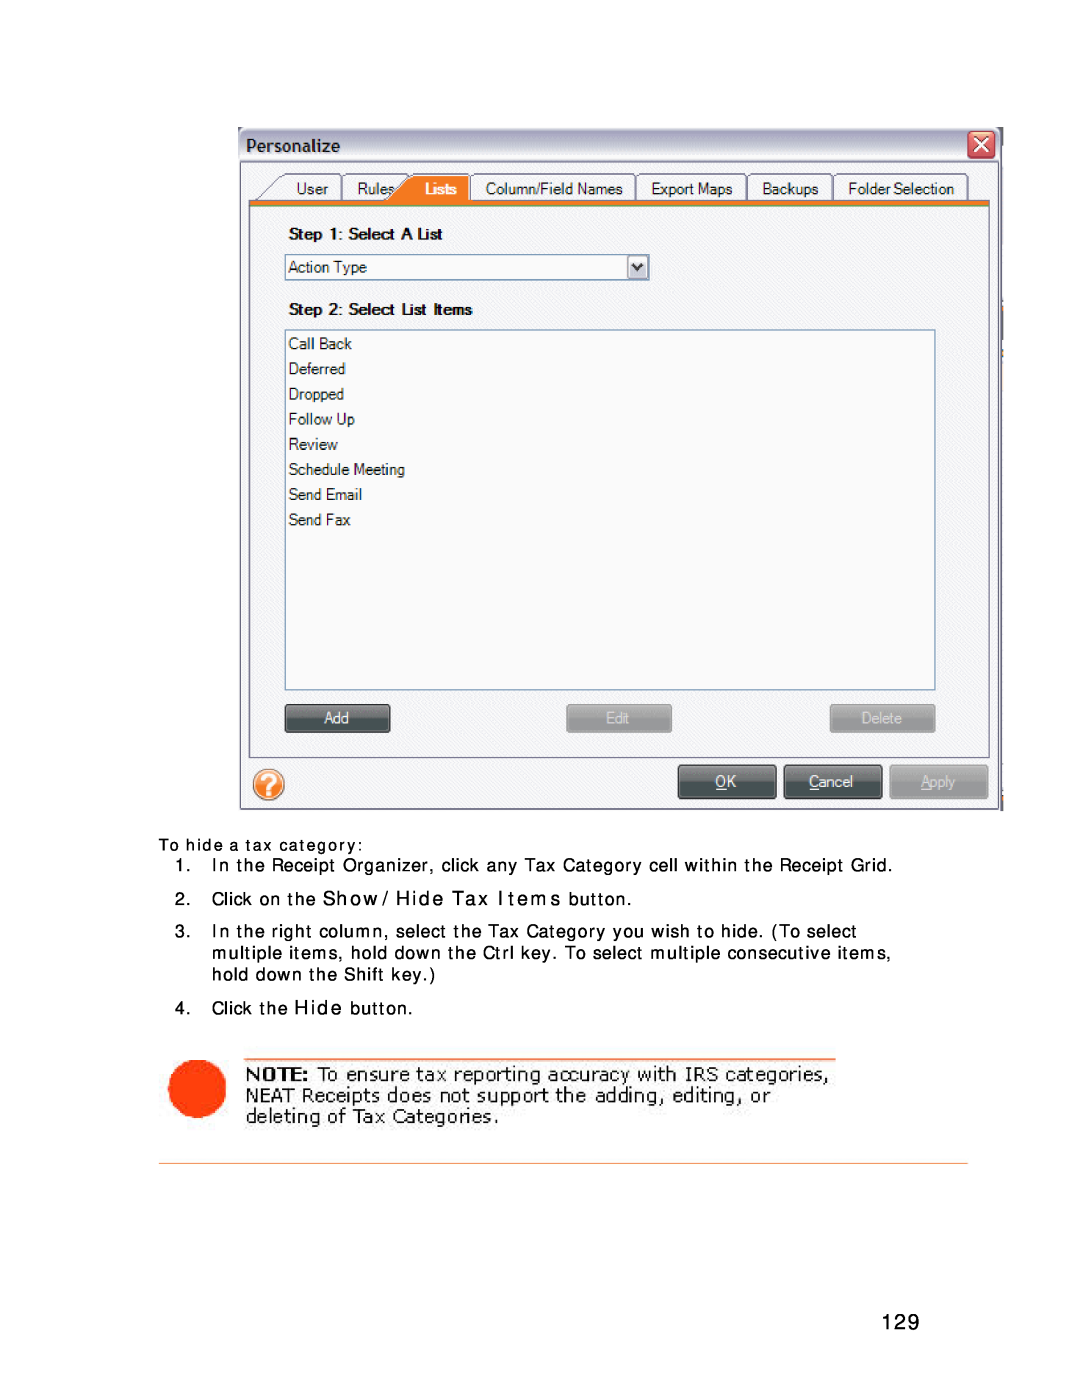 Univex NeatScan, NeatReceipts manual Click on the Show/Hide Tax Items button, Click the Hide button, To hide a tax category 